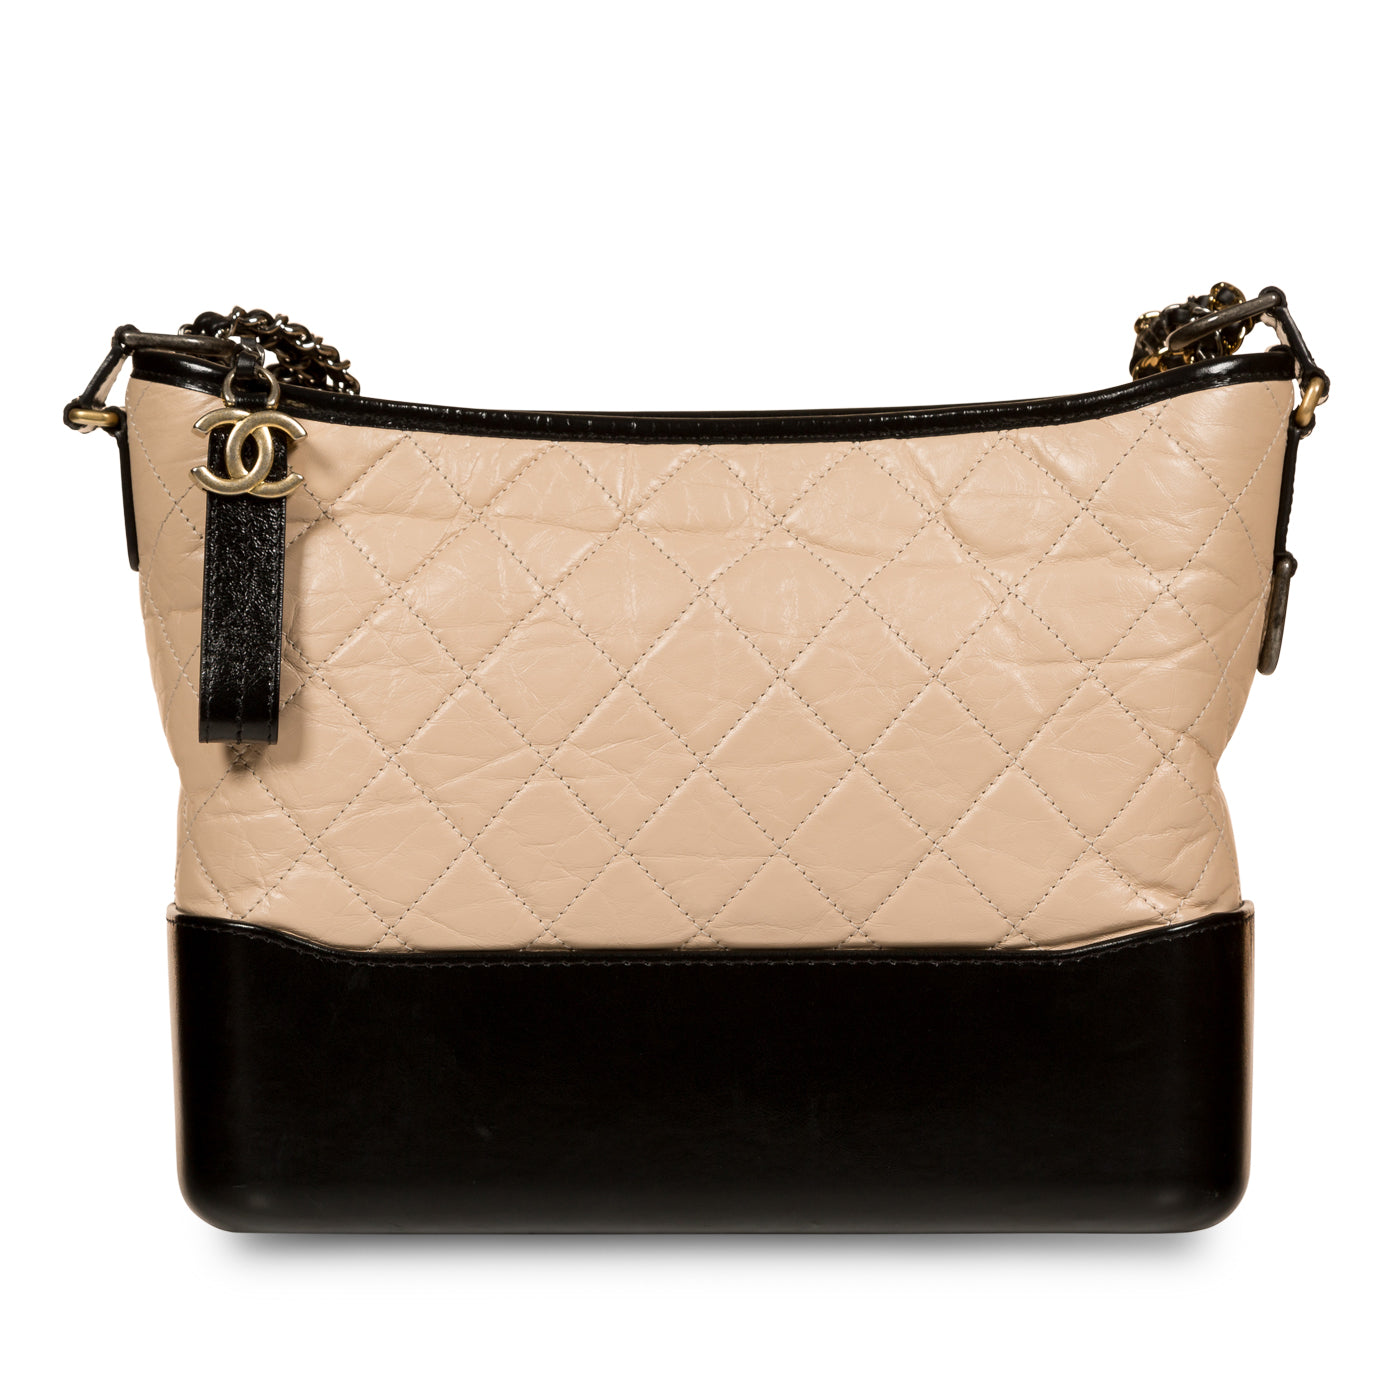 Chanel Gabrielle Bag - See Every New Chanel Gabrielle Bag